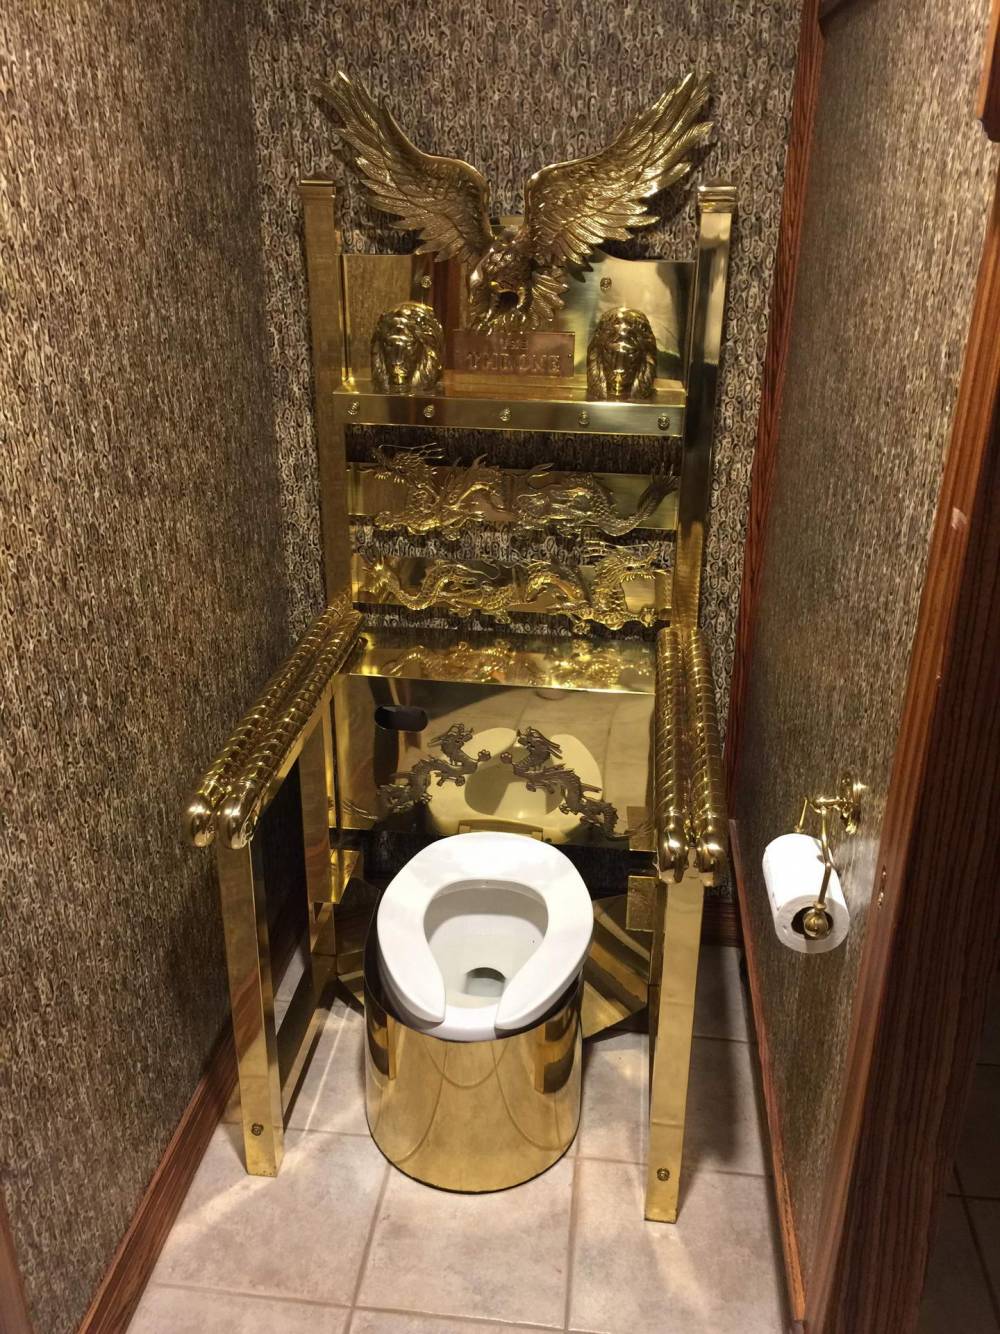 funny pics and memes - royal toilet throne -